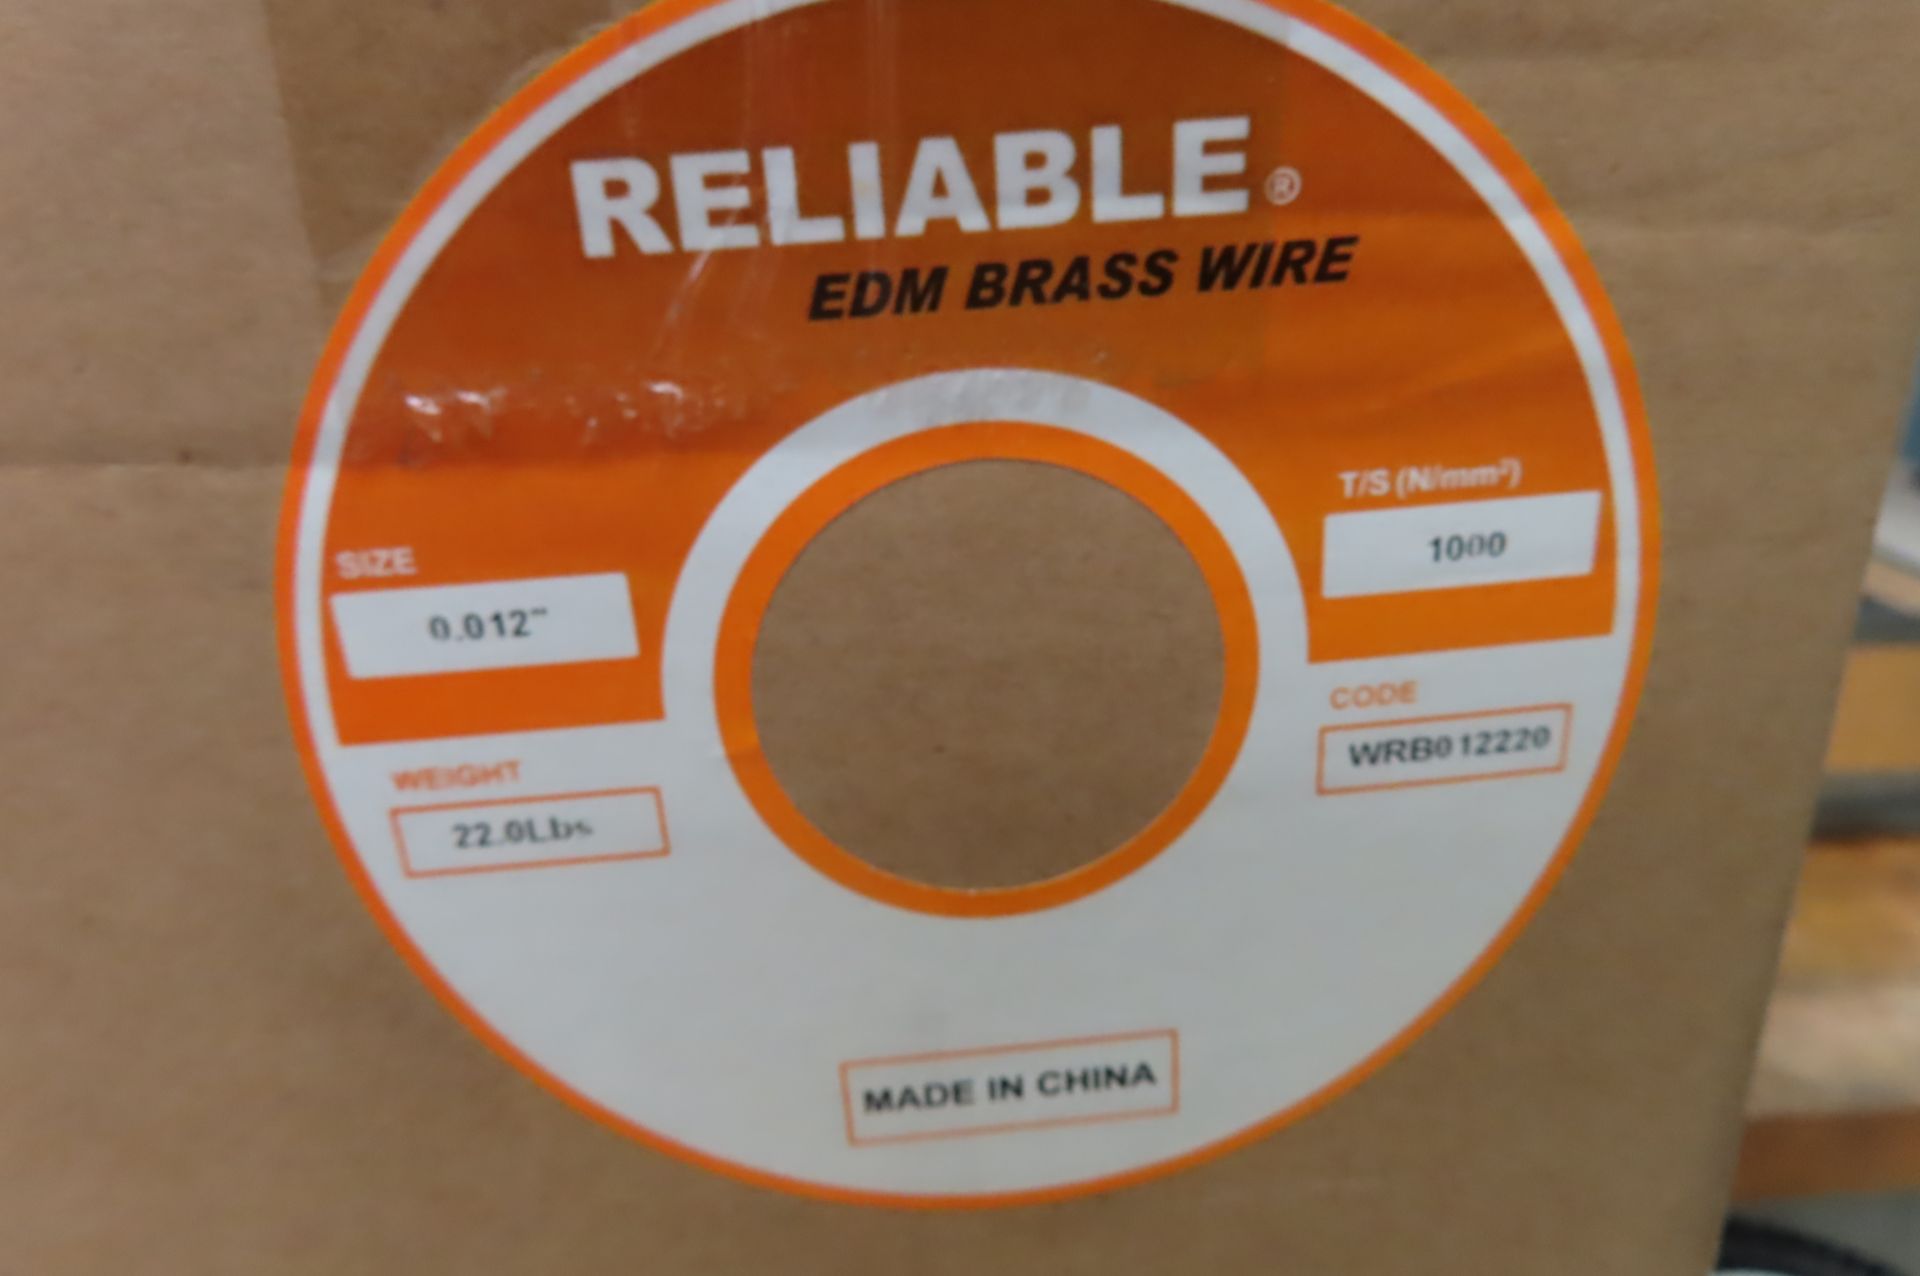 (5) RELIABLE EDM BRASS WIRE REELS, 0.012 IN. - Image 2 of 3